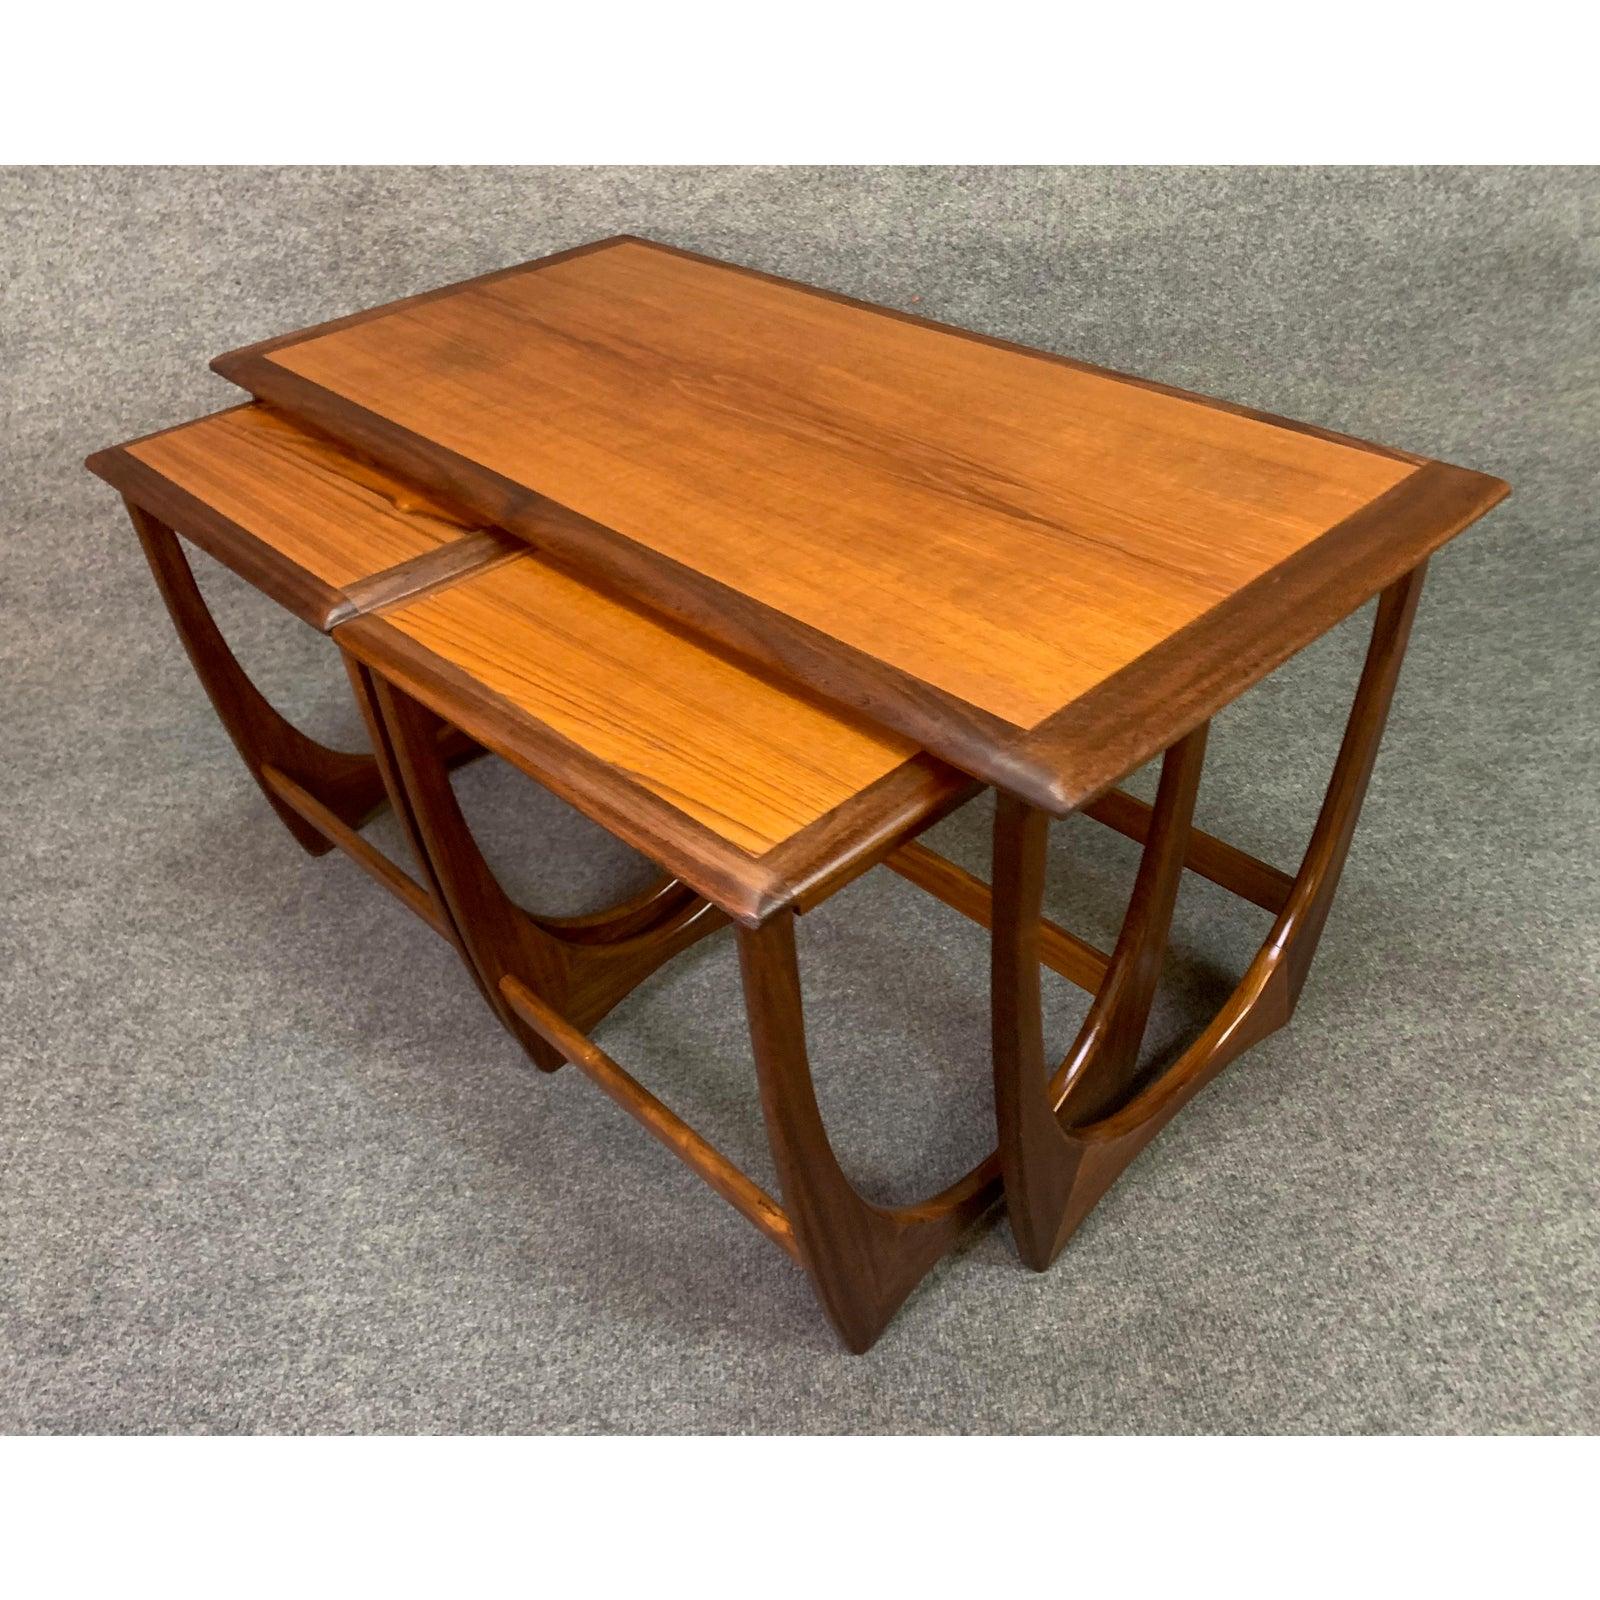 Here is a rare Mid-Century Modern set of coffee and nesting tables in teak part of the acclaimed 